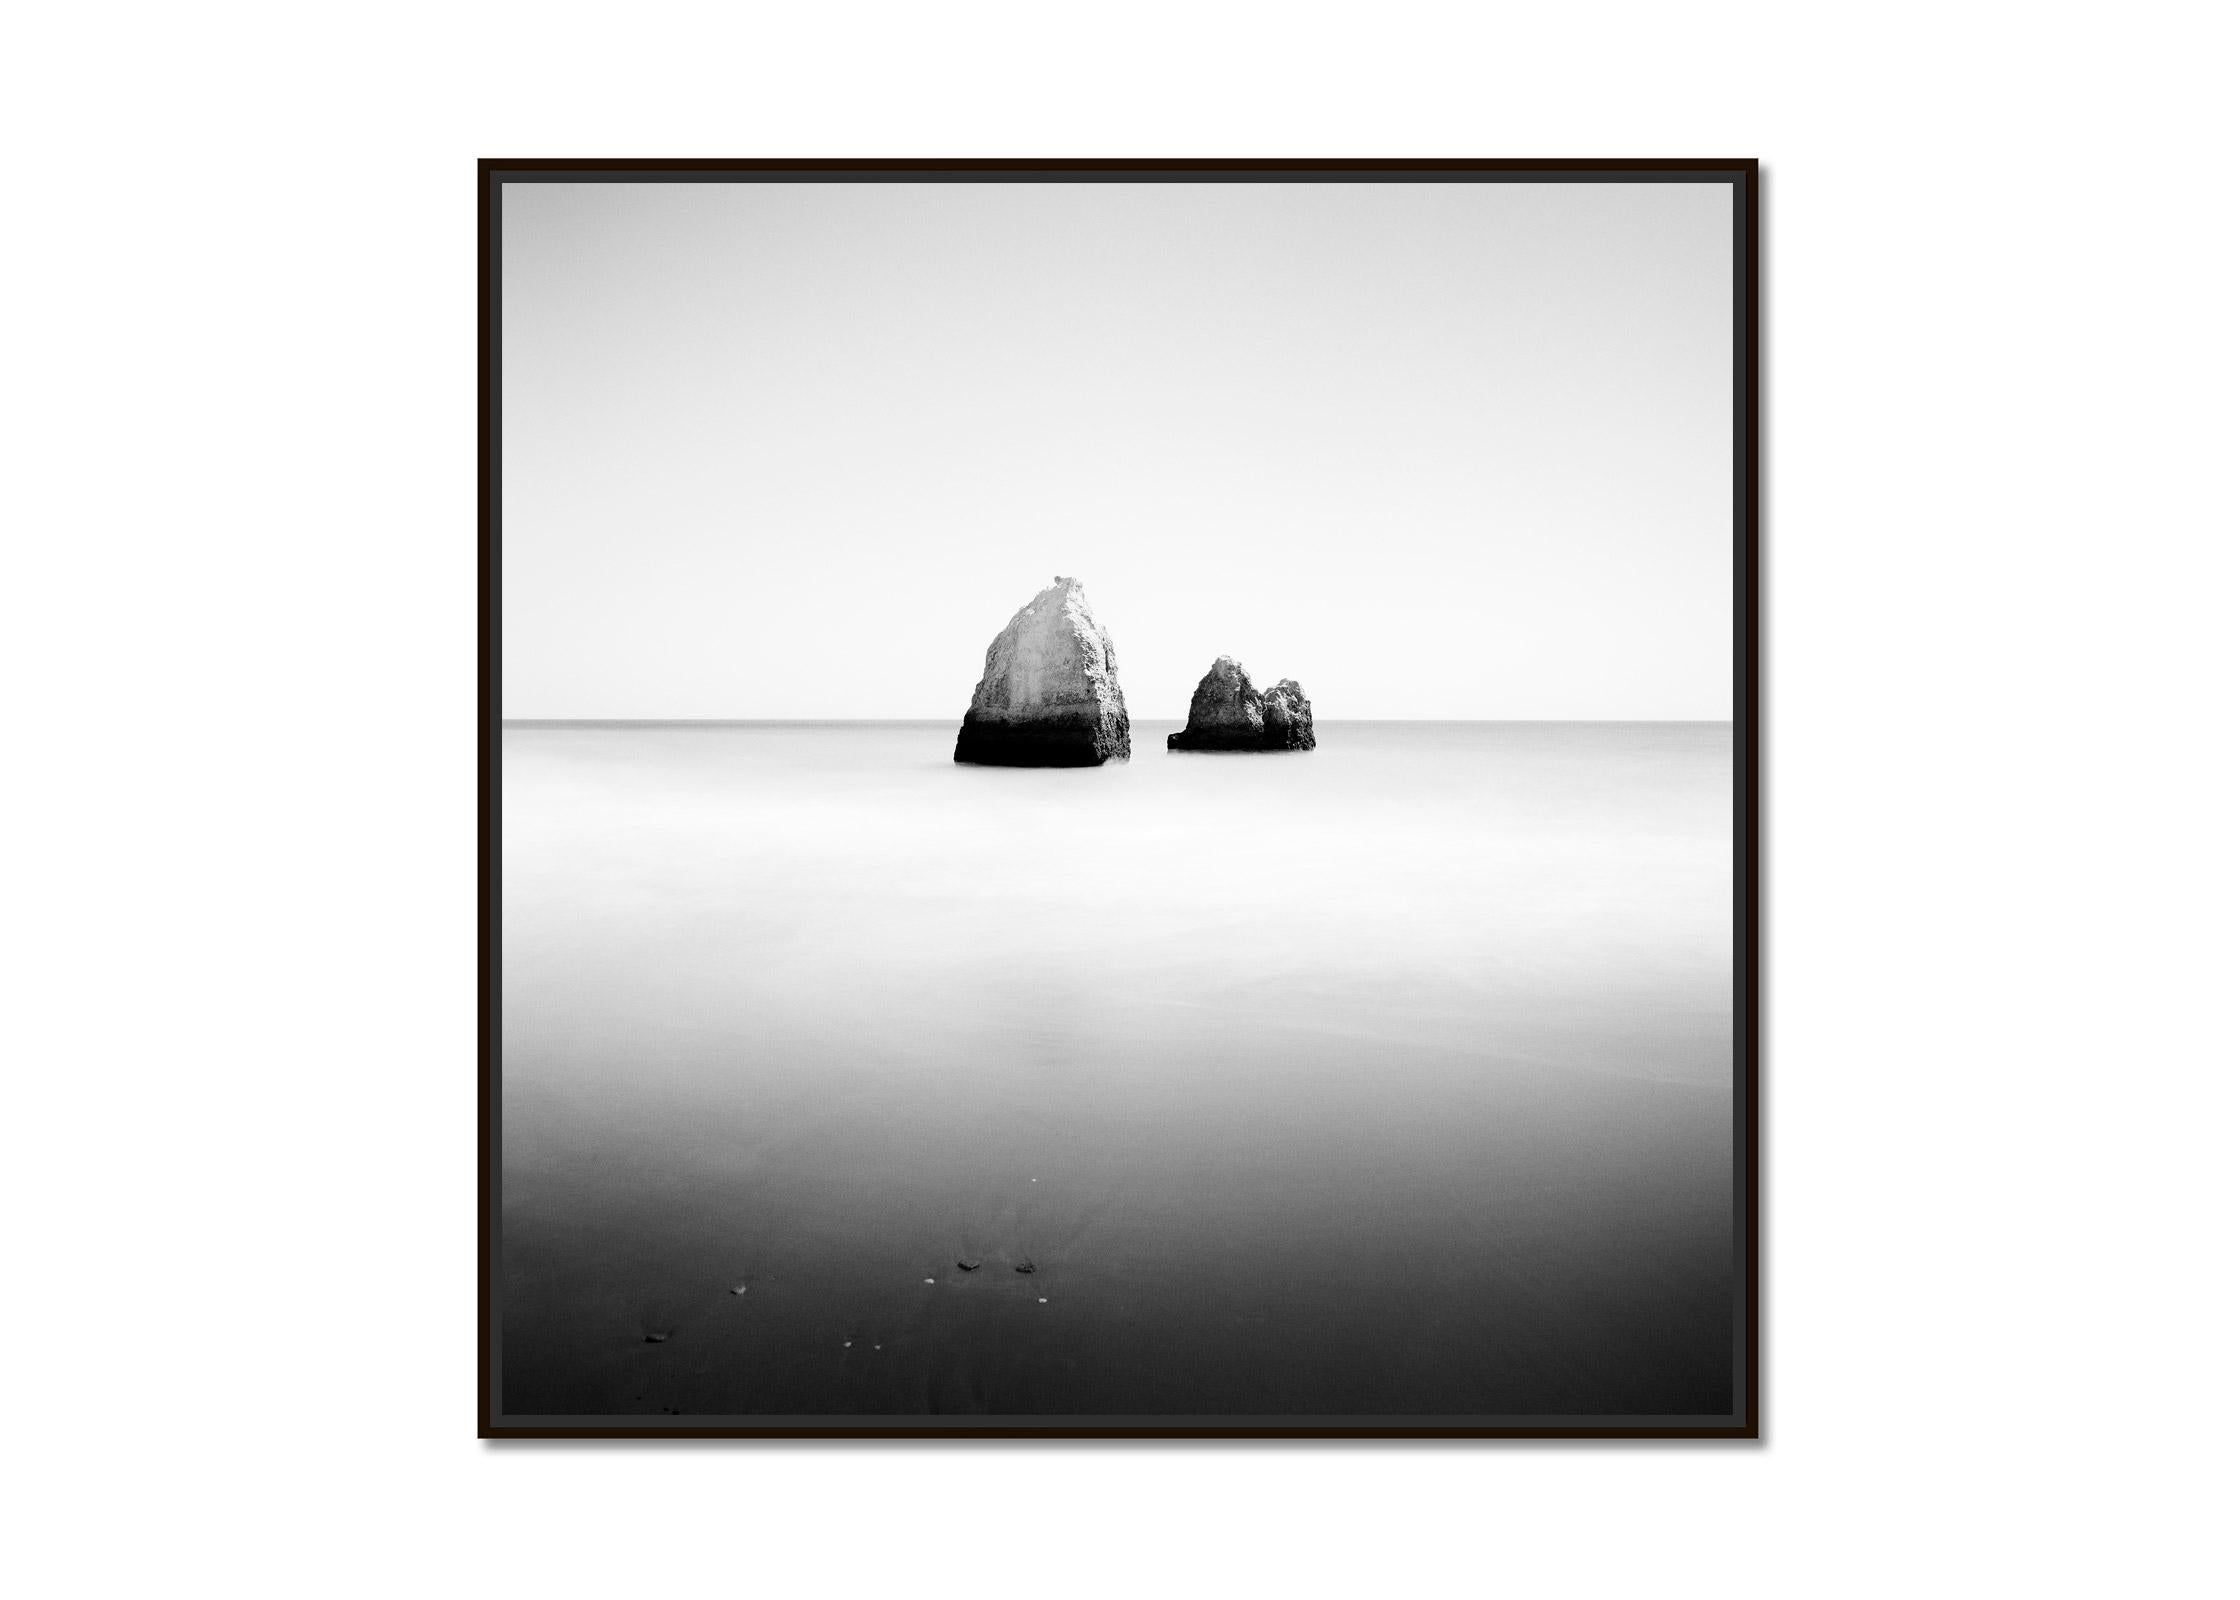 Sunken Pyramid, Spain, minimalist black and white art photography, landscape - Photograph by Gerald Berghammer